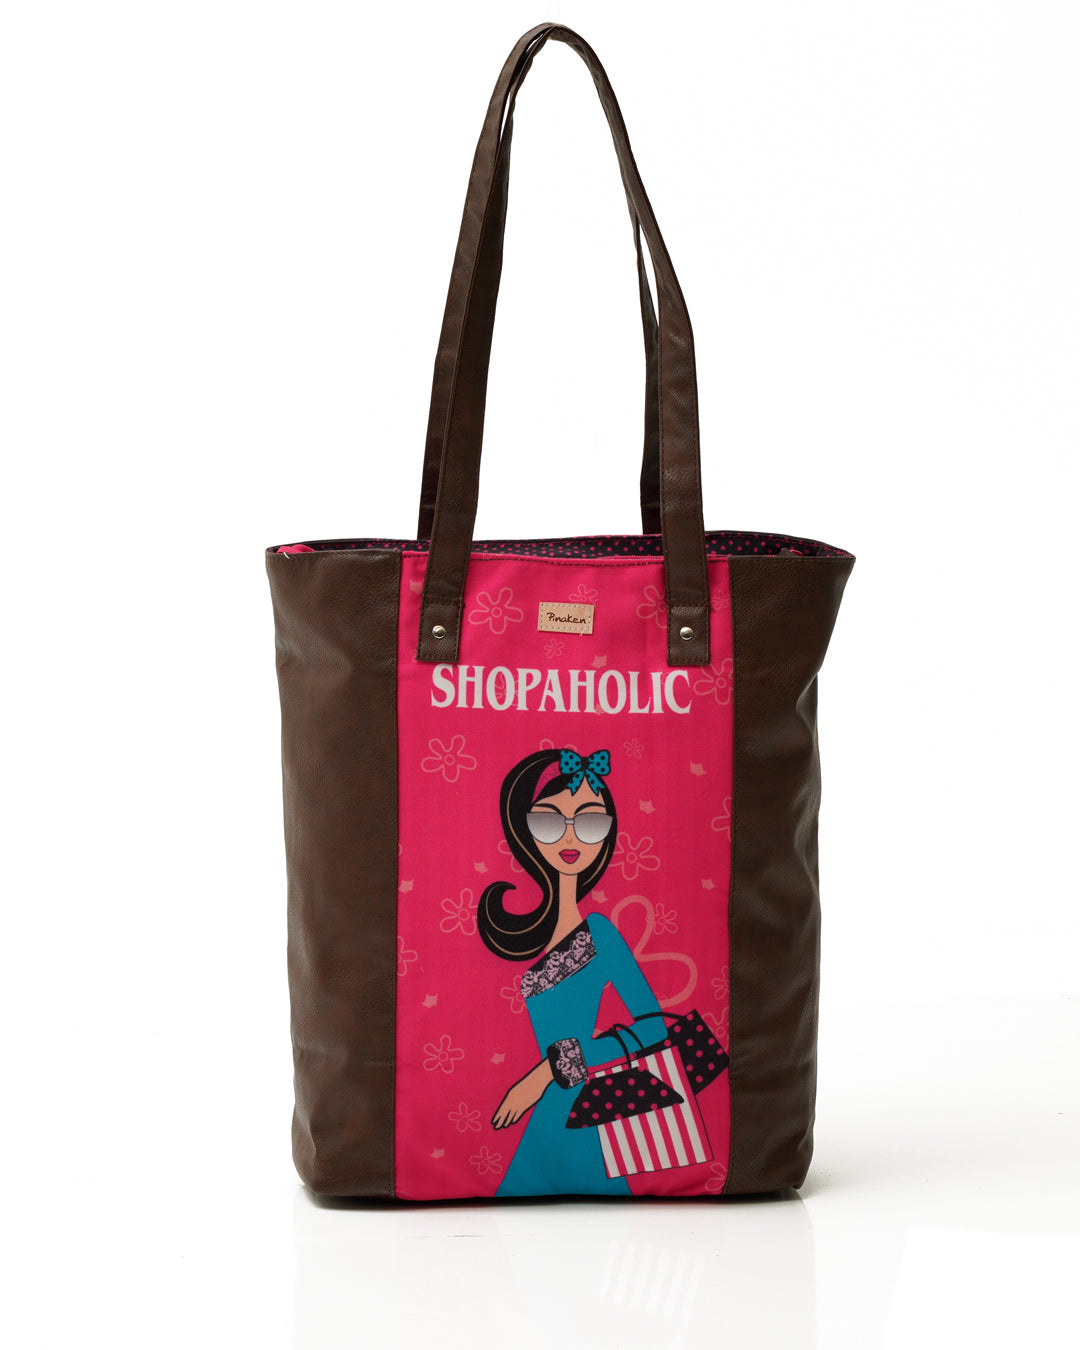 Shopaholic Shoulder Tote Bag With Vegan Leather